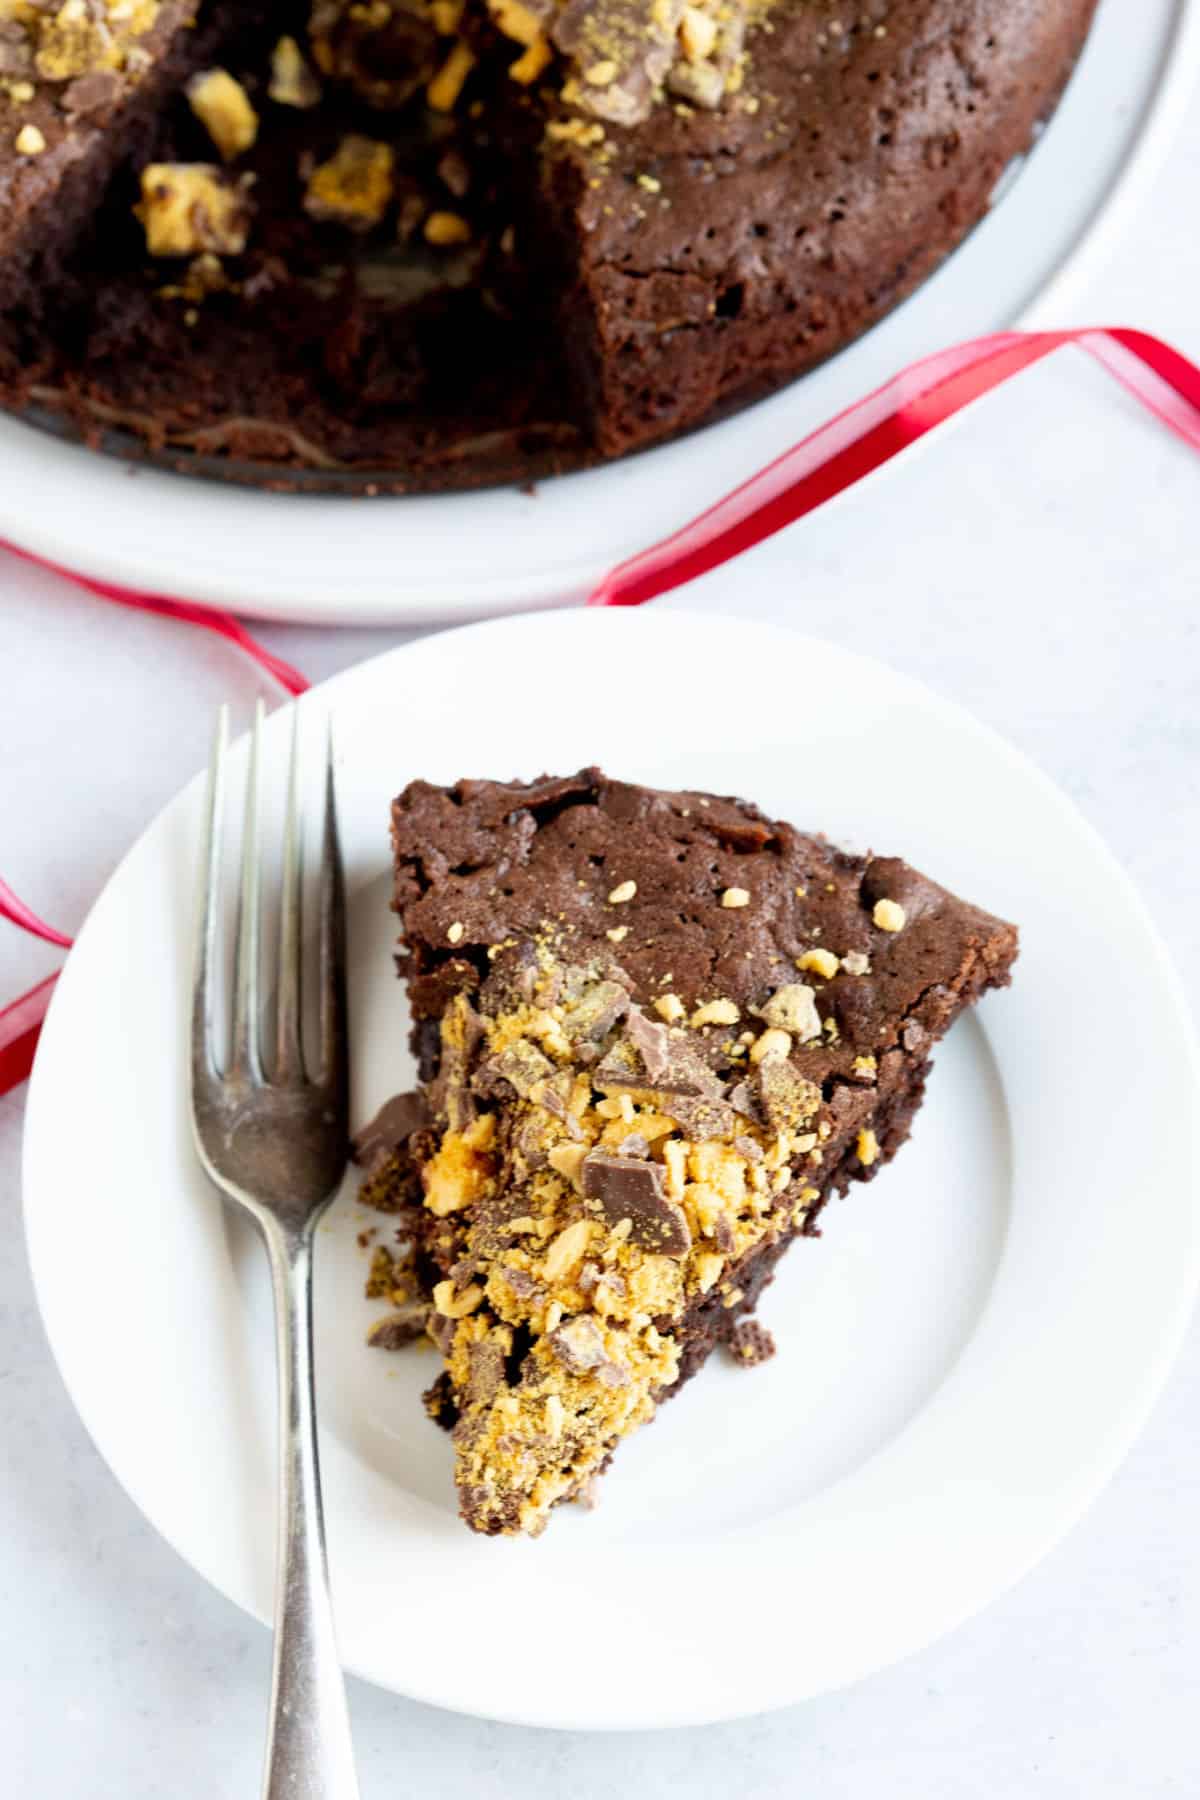 A slice of chocolate honeycomb torte on a white plate with a fork at the side.